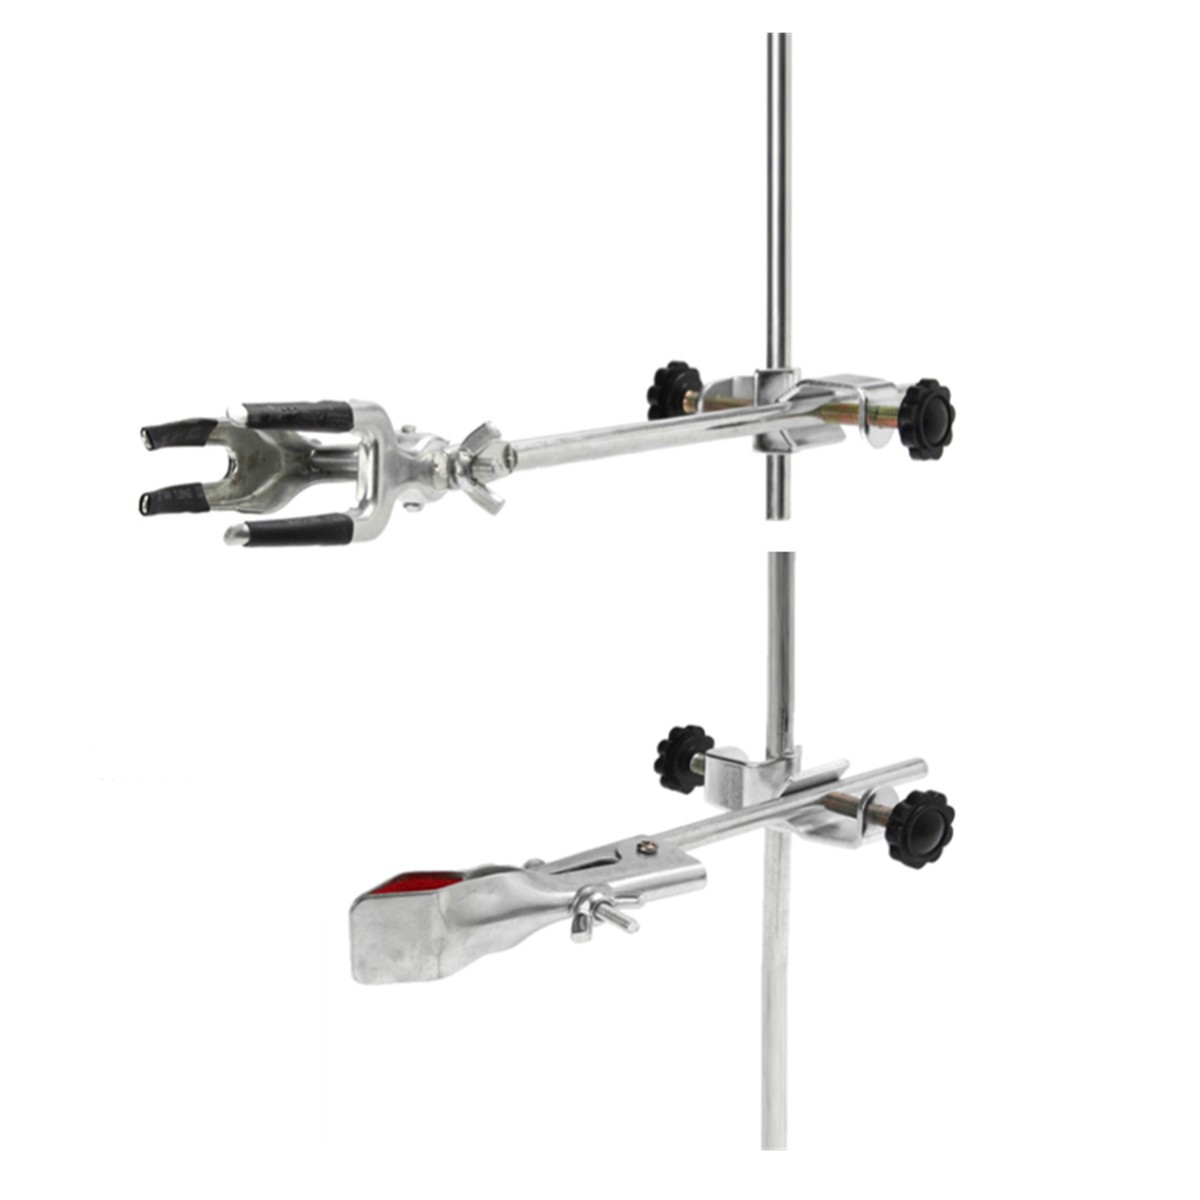 Laboratory-Stands-Support-Lab-Clamp-Flask-Clamp-Condenser-Clamp-Stand-Four-Prong-Extension-Flask-Cla-1410946-6